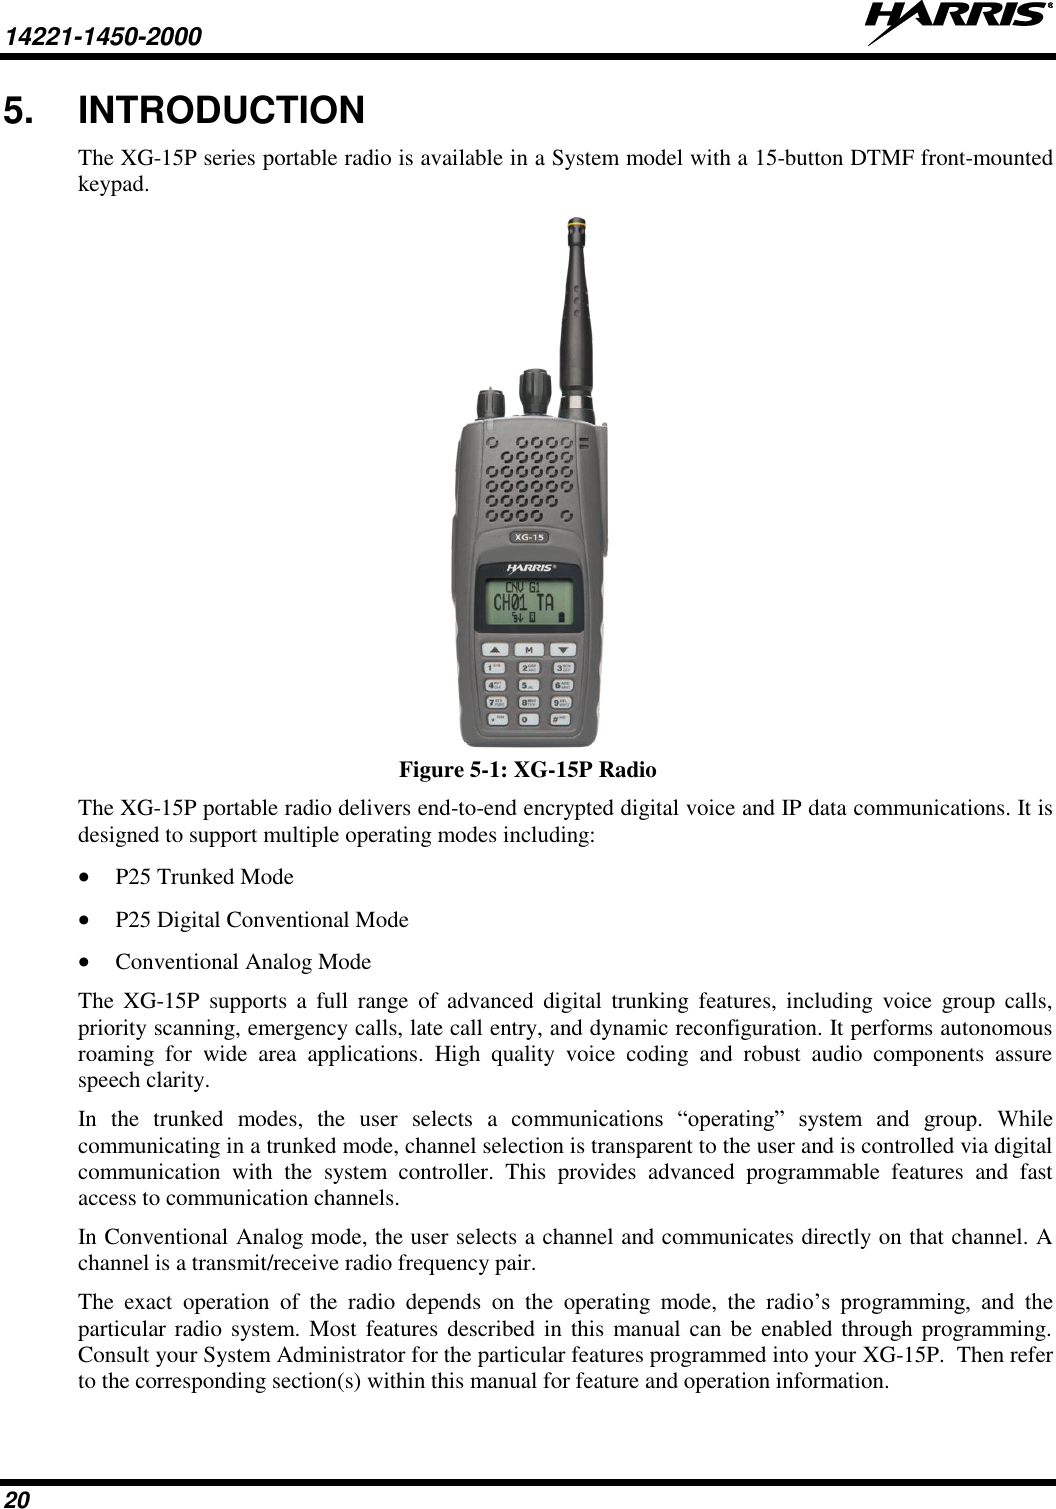 14221-1450-2000   20 5.  INTRODUCTION The XG-15P series portable radio is available in a System model with a 15-button DTMF front-mounted keypad.   Figure 5-1: XG-15P Radio The XG-15P portable radio delivers end-to-end encrypted digital voice and IP data communications. It is designed to support multiple operating modes including:  P25 Trunked Mode  P25 Digital Conventional Mode  Conventional Analog Mode The  XG-15P  supports  a  full  range  of  advanced  digital  trunking  features,  including  voice  group  calls, priority scanning, emergency calls, late call entry, and dynamic reconfiguration. It performs autonomous roaming  for  wide  area  applications.  High  quality  voice  coding  and  robust  audio  components  assure speech clarity. In  the  trunked  modes,  the  user  selects  a  communications  “operating”  system  and  group.  While communicating in a trunked mode, channel selection is transparent to the user and is controlled via digital communication  with  the  system  controller.  This  provides  advanced  programmable  features  and  fast access to communication channels. In Conventional Analog mode, the user selects a channel and communicates directly on that channel. A channel is a transmit/receive radio frequency pair. The  exact  operation  of  the  radio  depends  on  the  operating  mode,  the  radio’s  programming,  and  the particular radio  system. Most features described in  this manual  can be  enabled through programming. Consult your System Administrator for the particular features programmed into your XG-15P.  Then refer to the corresponding section(s) within this manual for feature and operation information. 